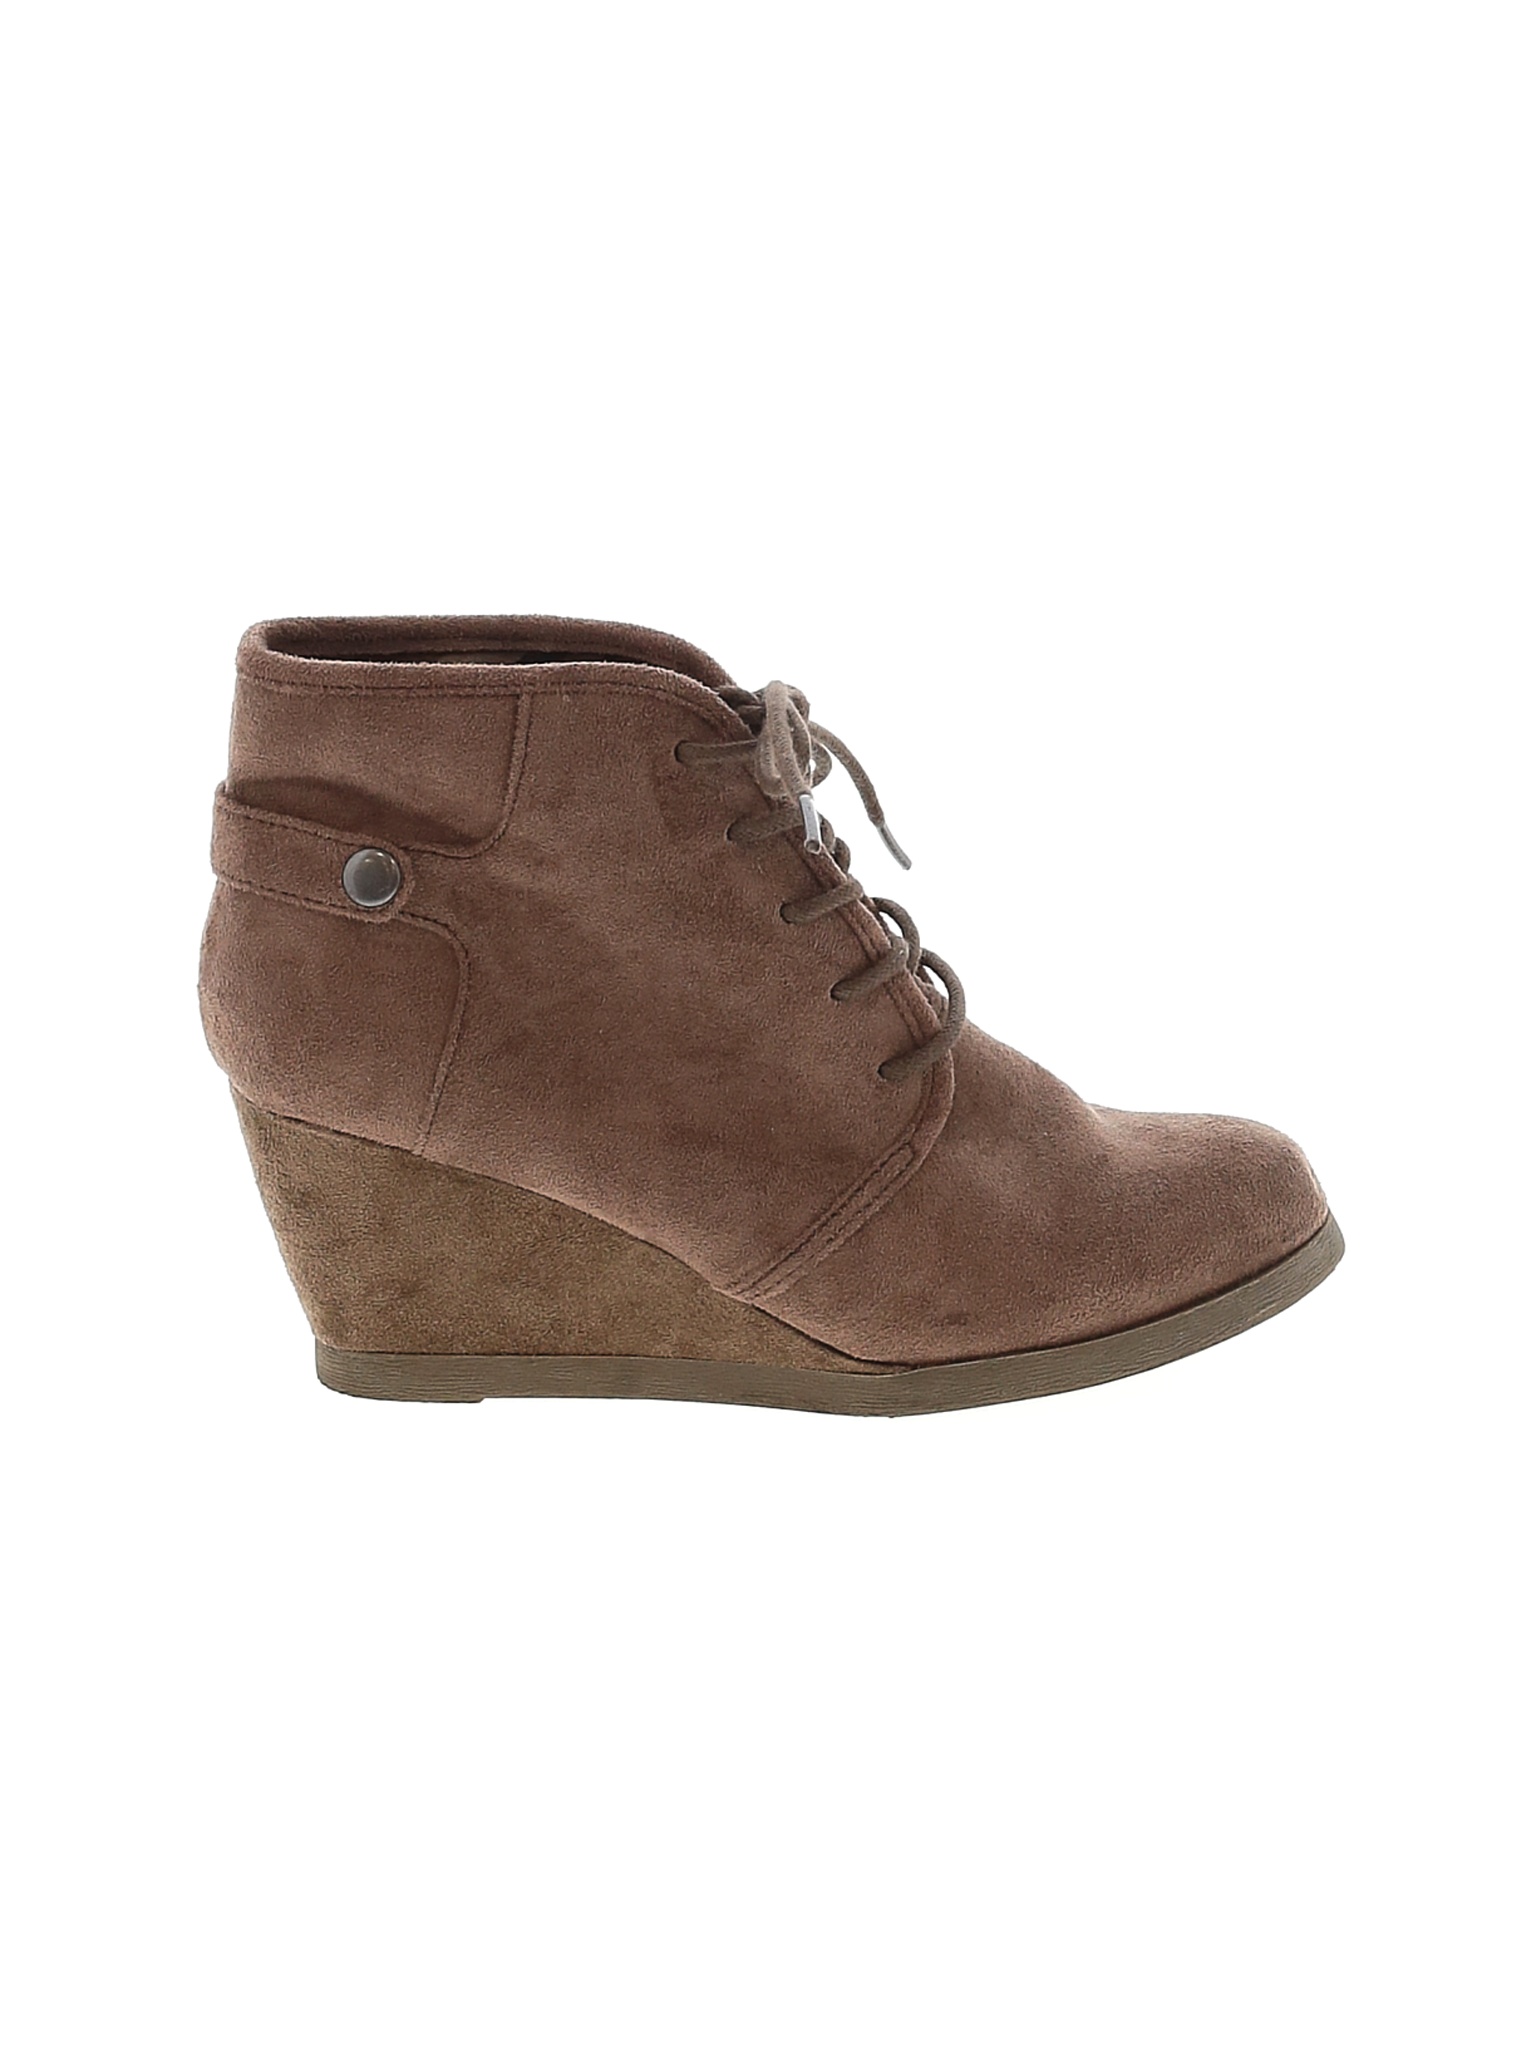 Madden Girl Solid Brown Tan Ankle Boots Size 8 - 47% off | thredUP